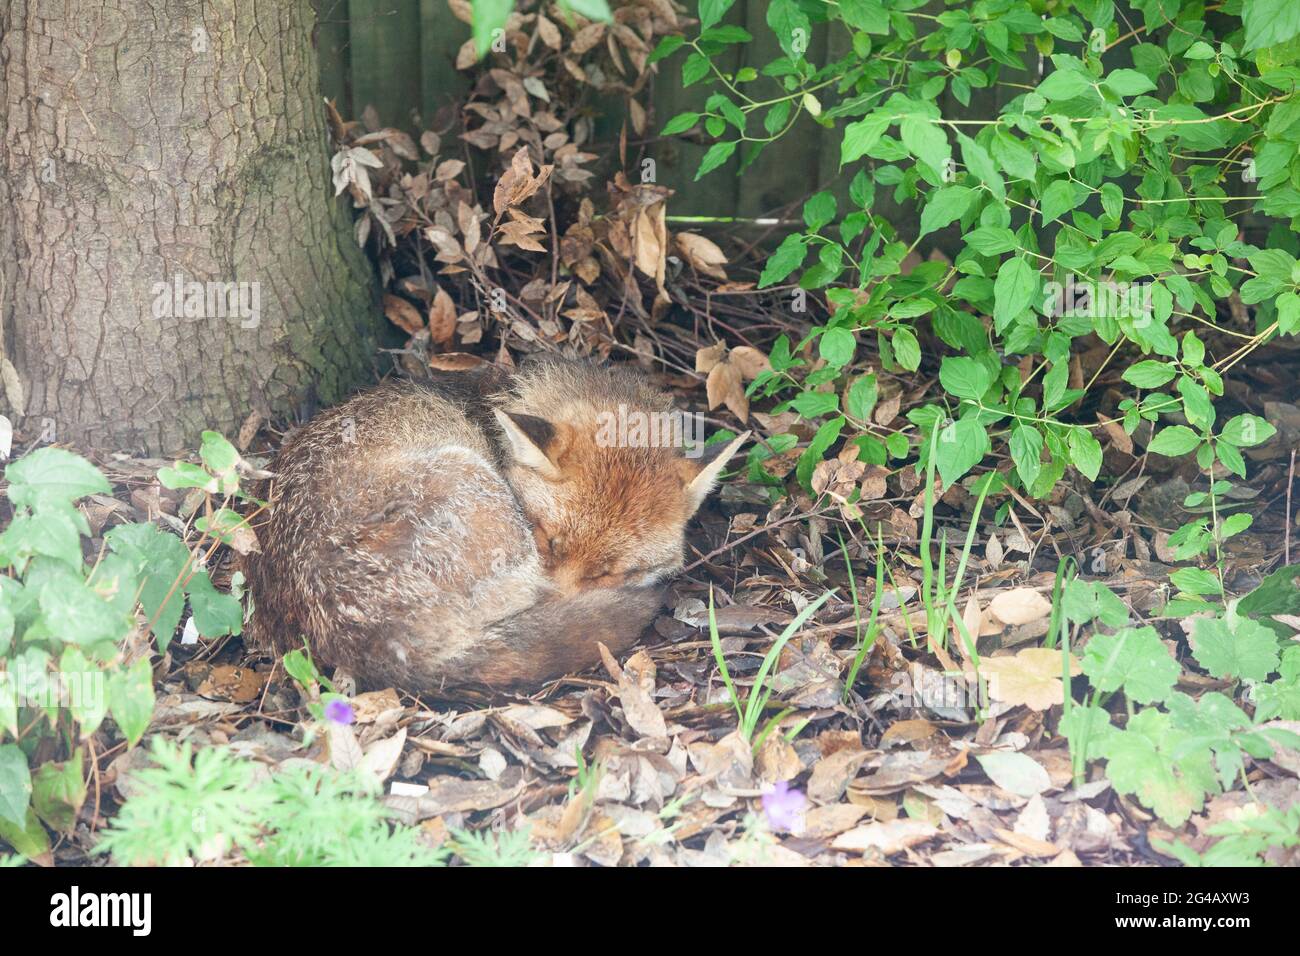 UK weather, 20 June 2021: on the summer solstice grey skies and drizzle make worshipping the sun difficult. For nocturnal foxes the daytime is for sleeping anyway. This dog fox, resident in a garden in Clapham, south London, snoozes and yawns on a bed of leaves under a holm oak. Anna Watson/Alamy Live News Stock Photo